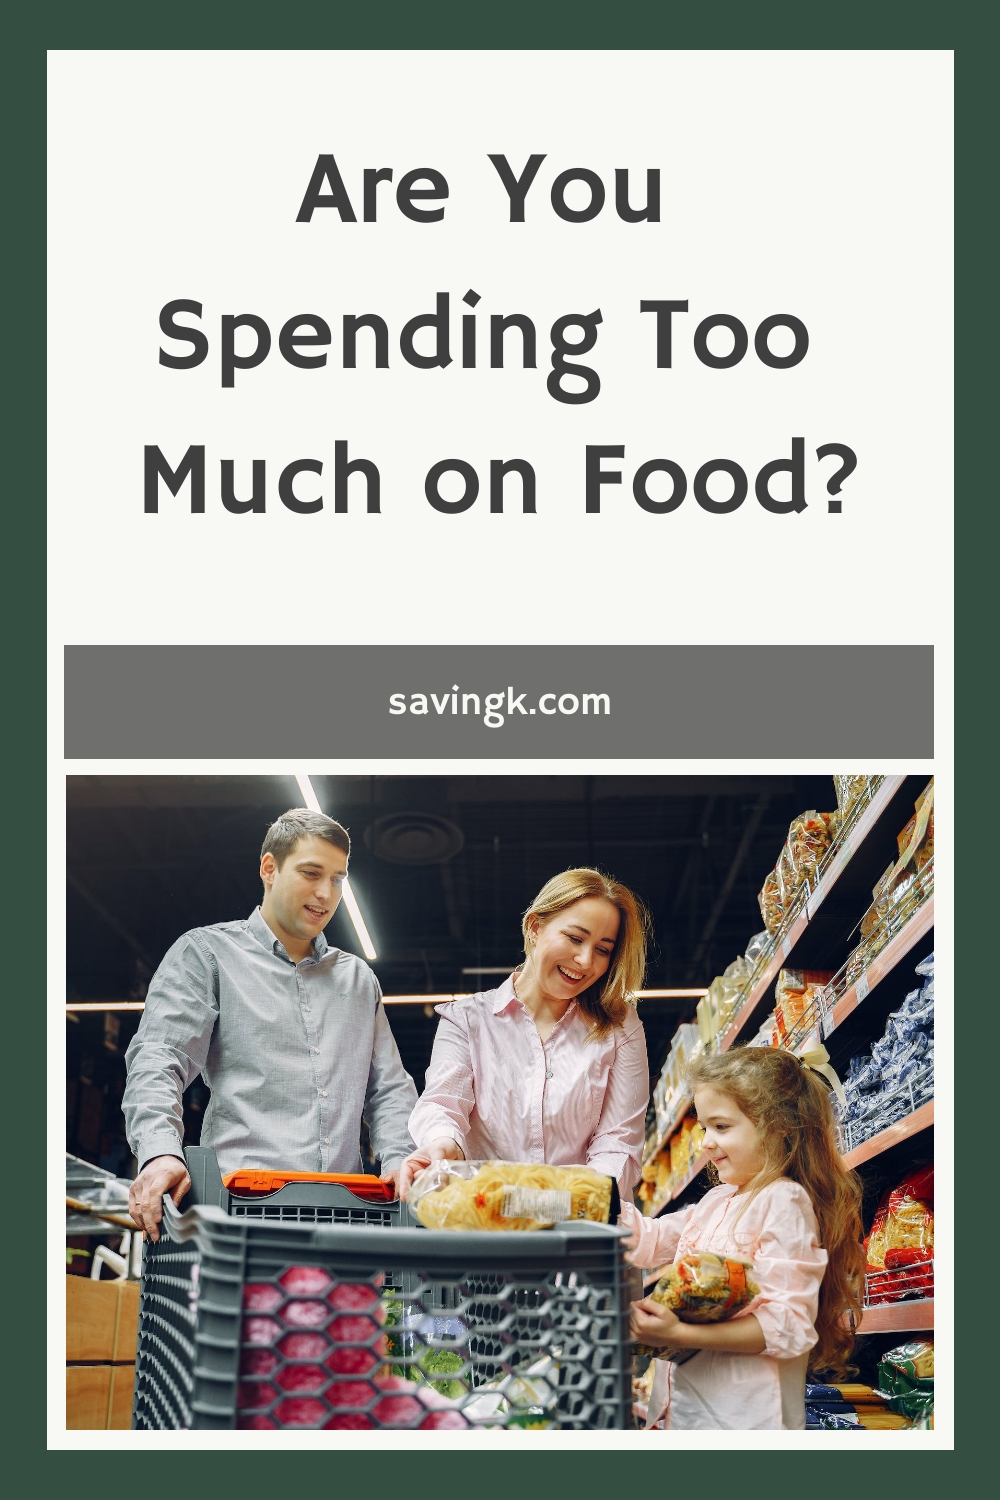 Are You Spending Too Much on Food?